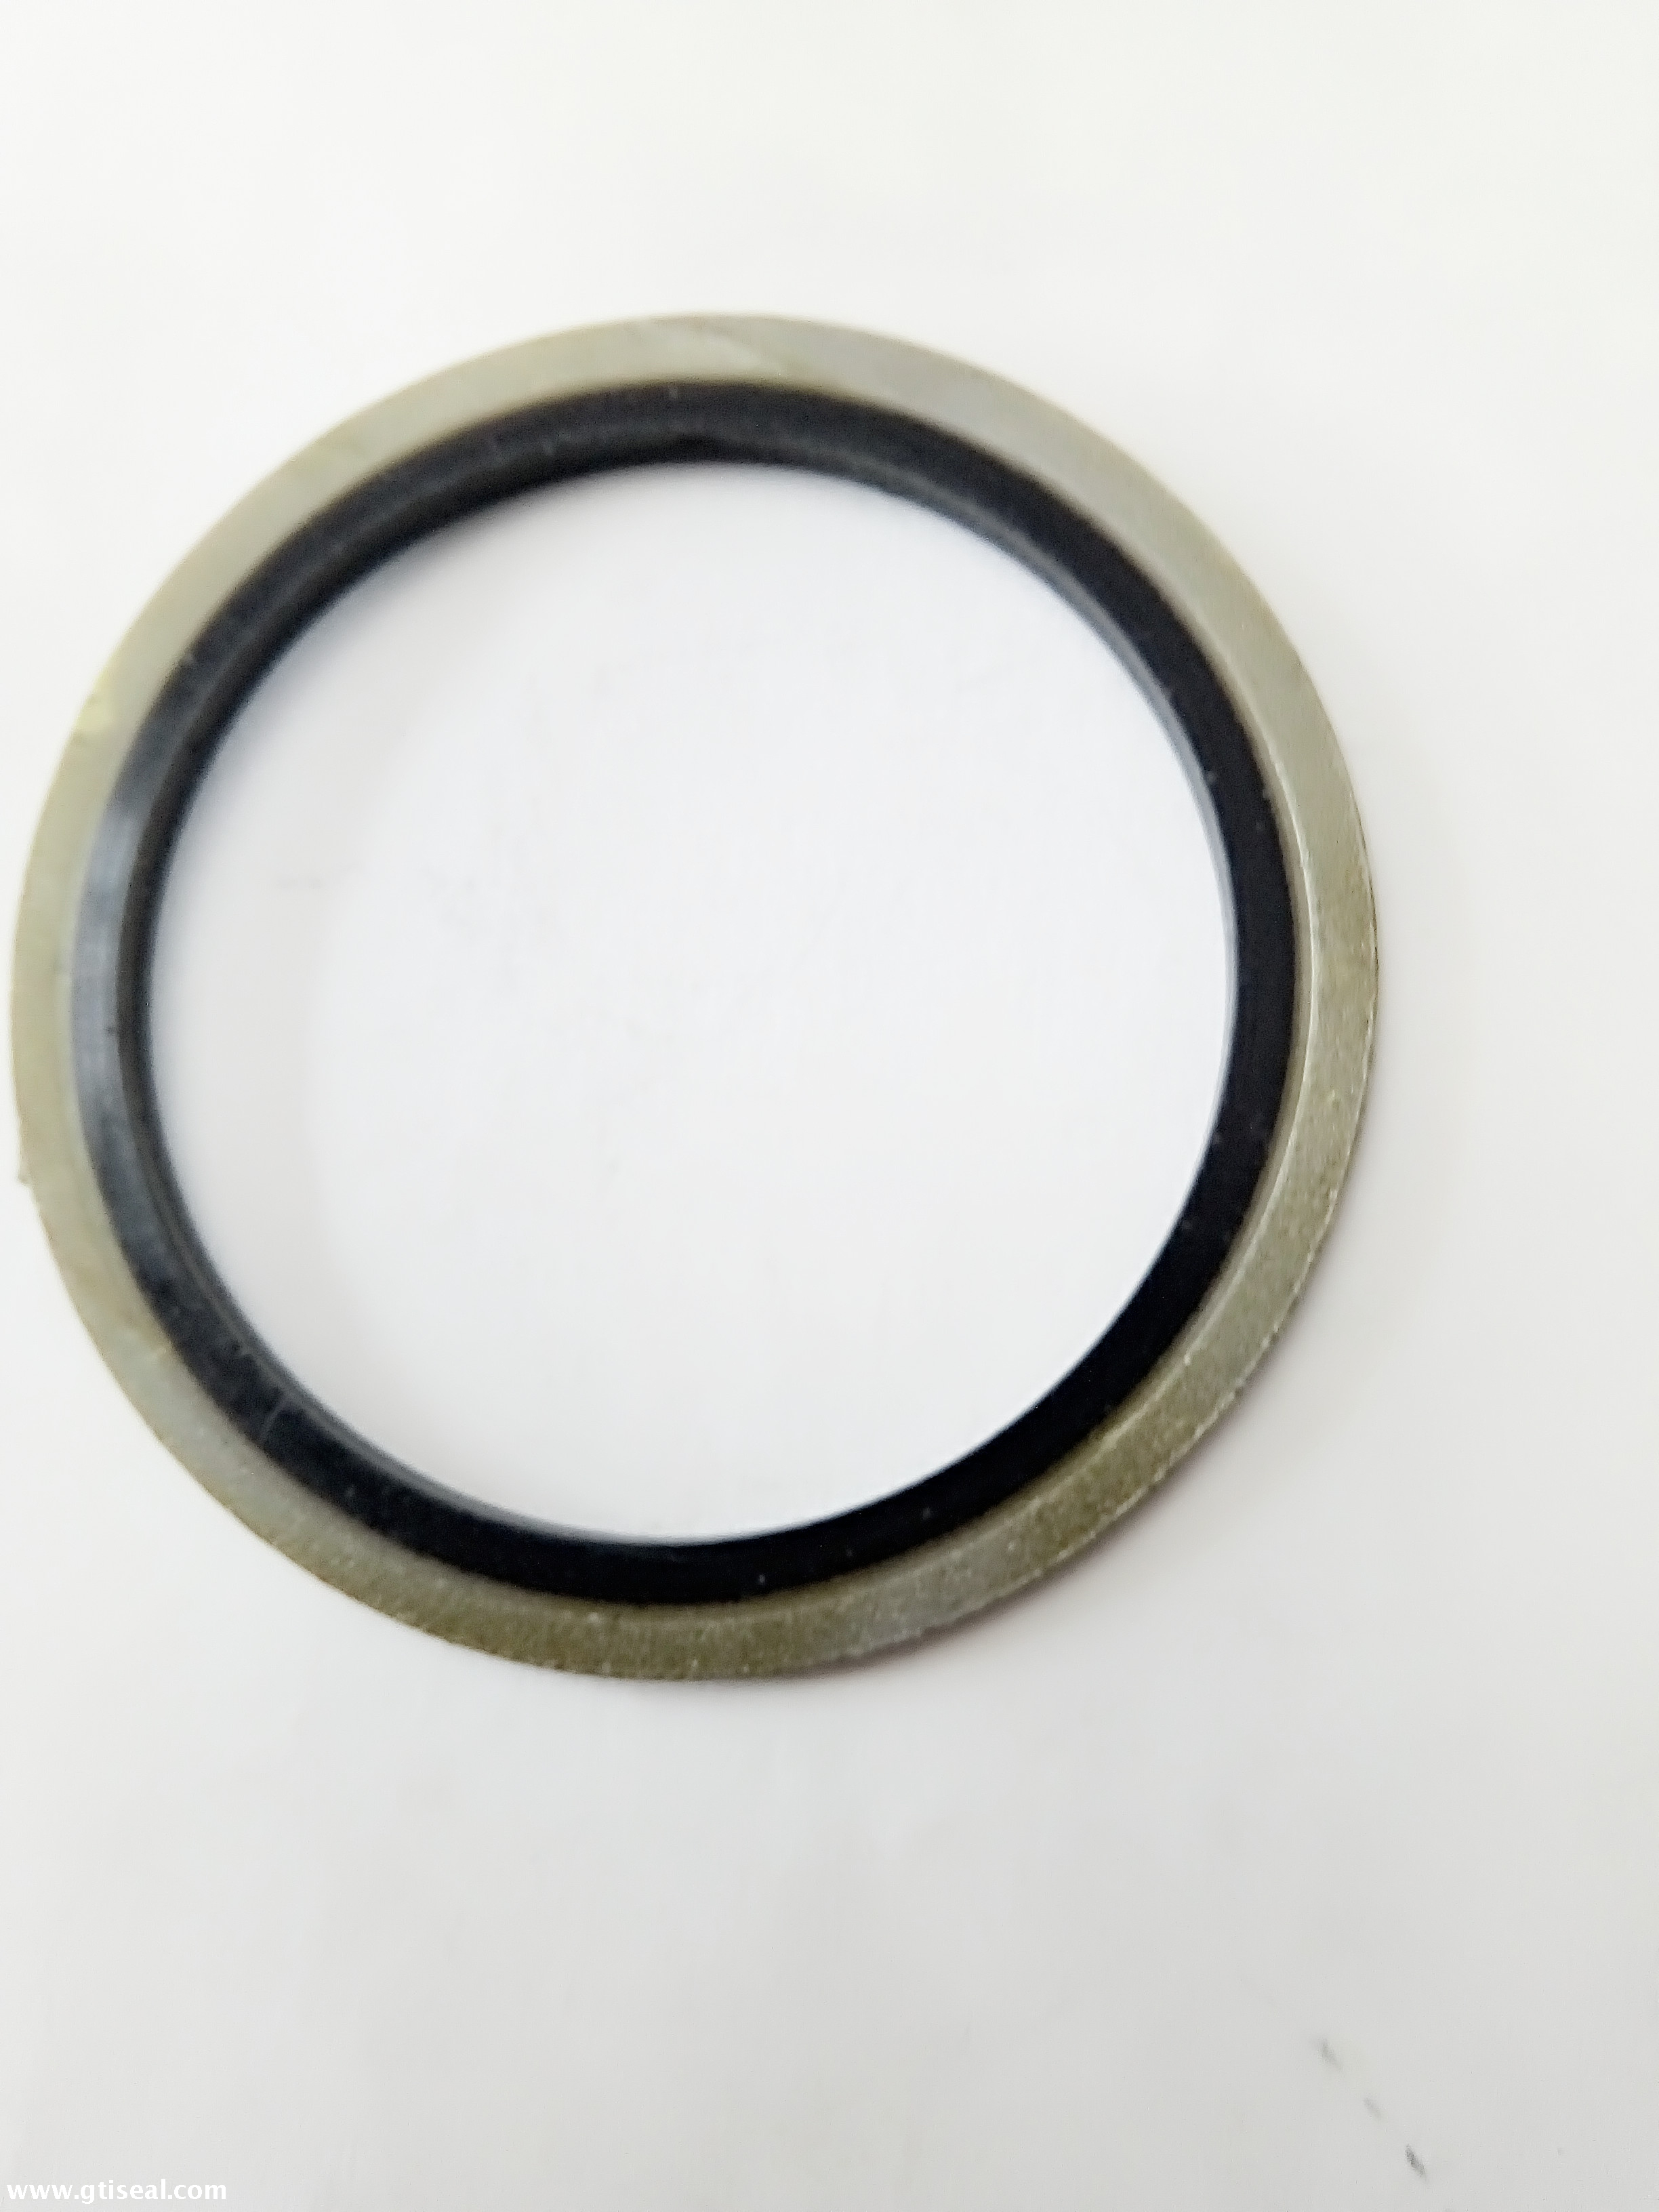 High quality dowty seal/bonded washer/bonded seal 